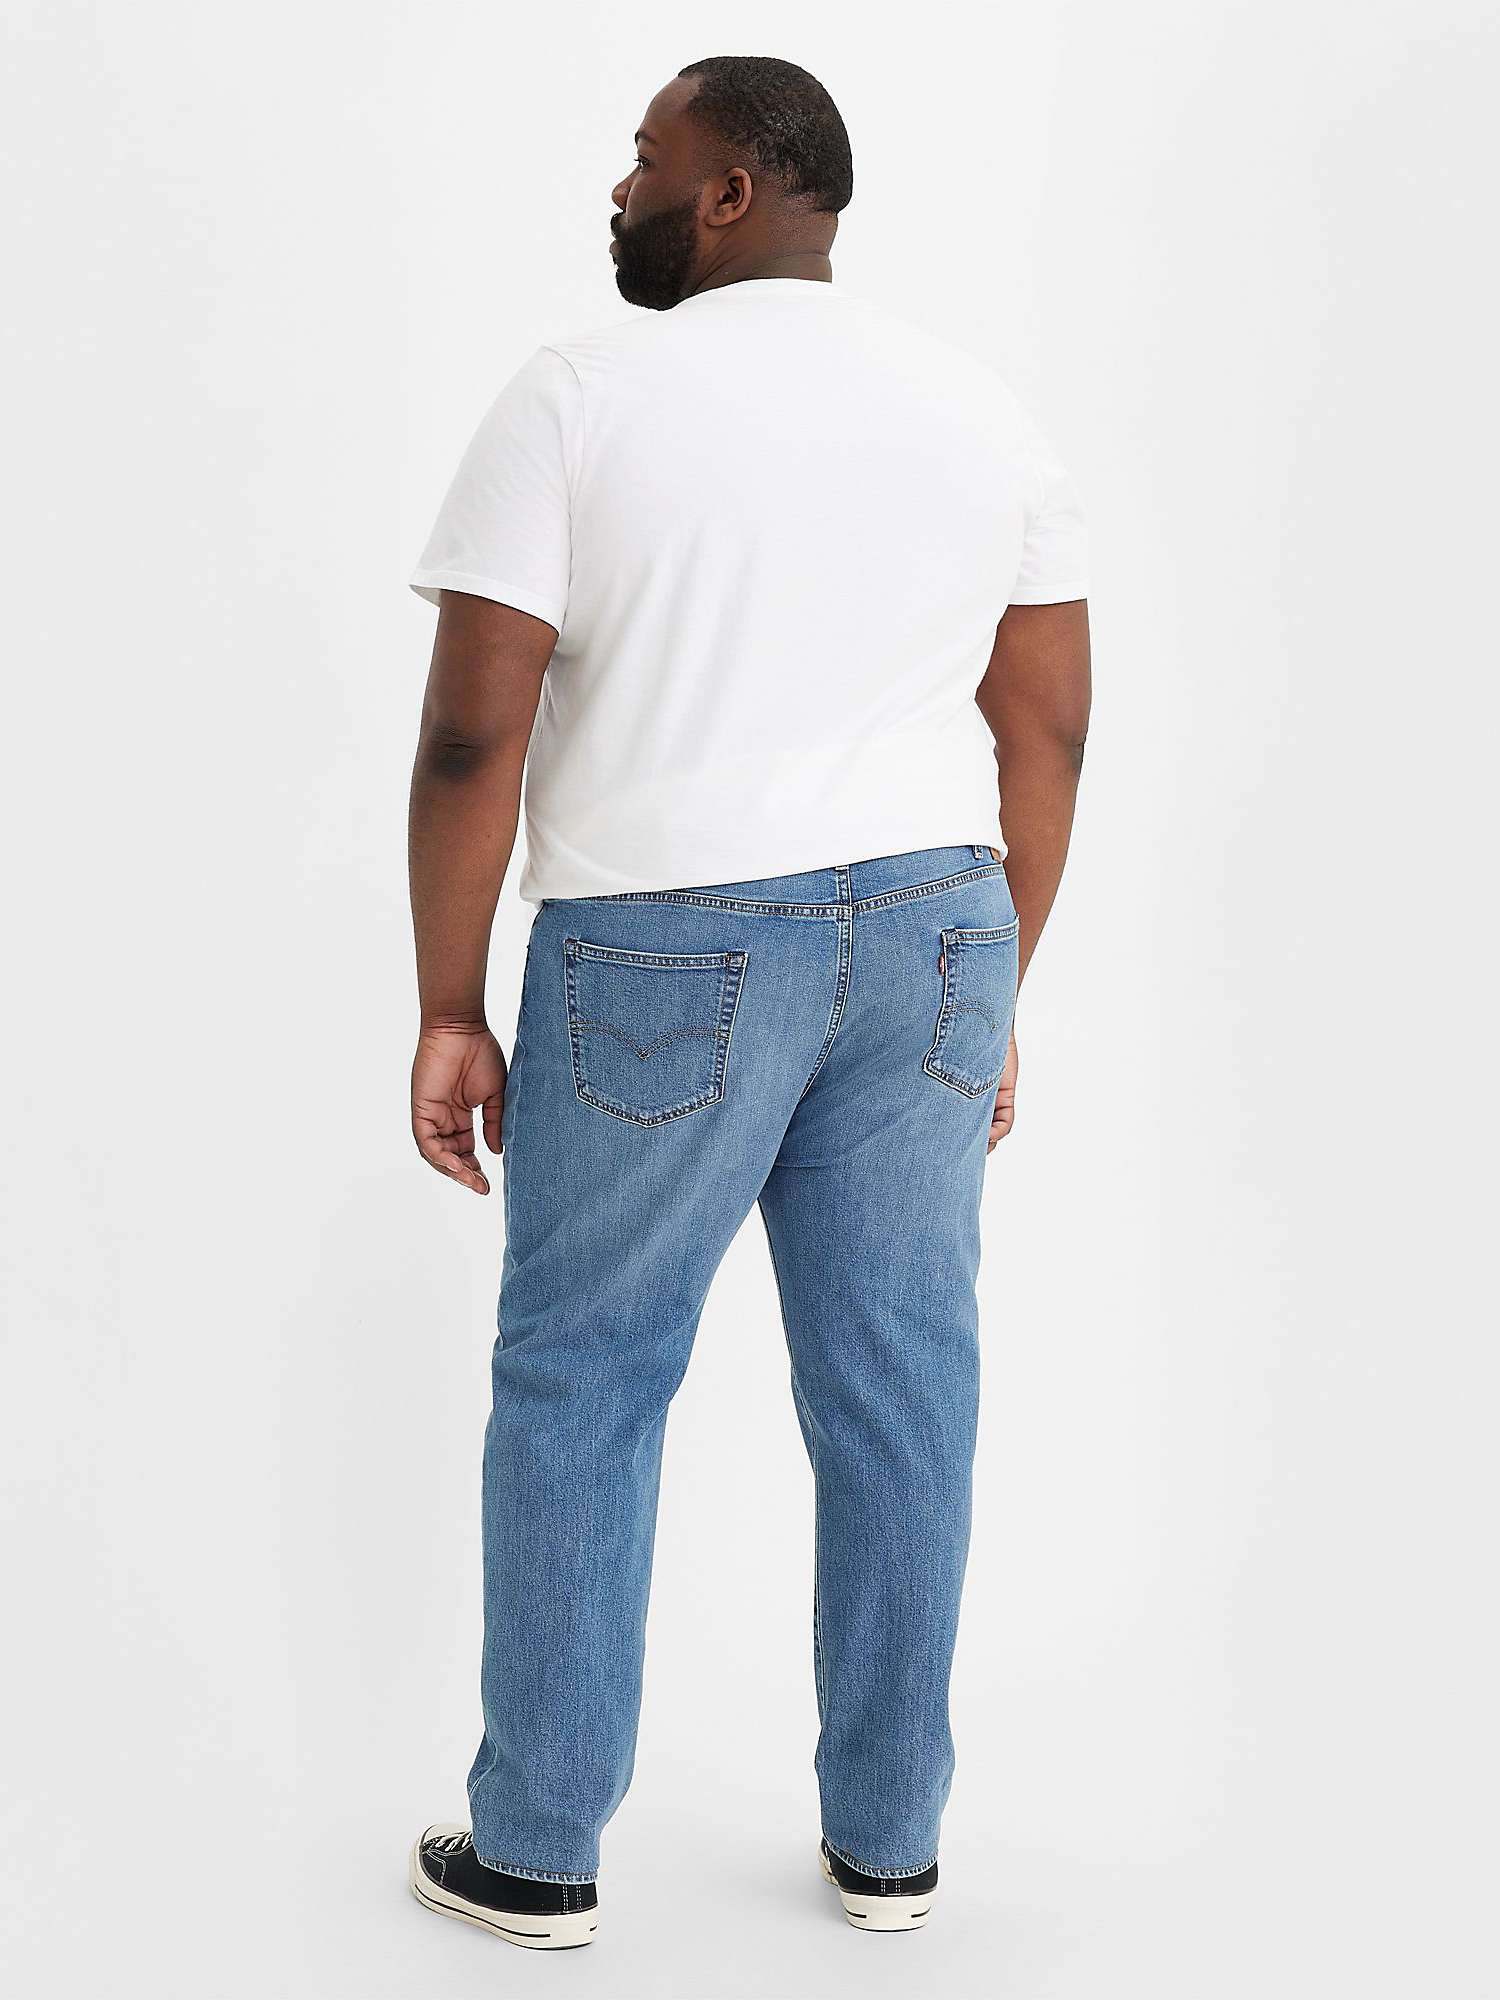 Levi's Big & Tall 512 Slim Tapered Jeans, Blue at John Lewis & Partners